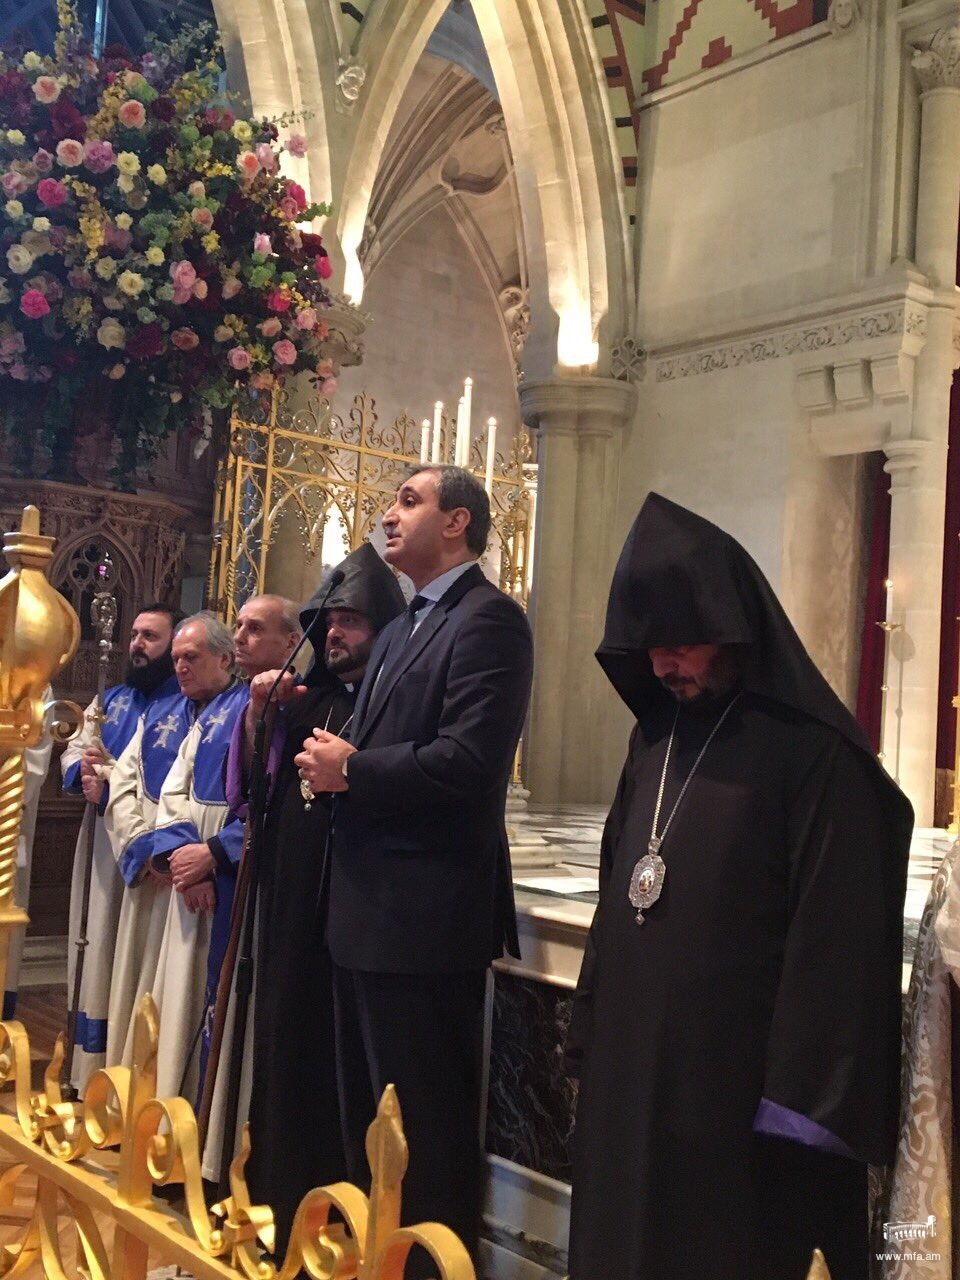 The Mass served at the Armenian Church of Saint Yegiche on the occasion of the 25th anniversary of the Armenian Army